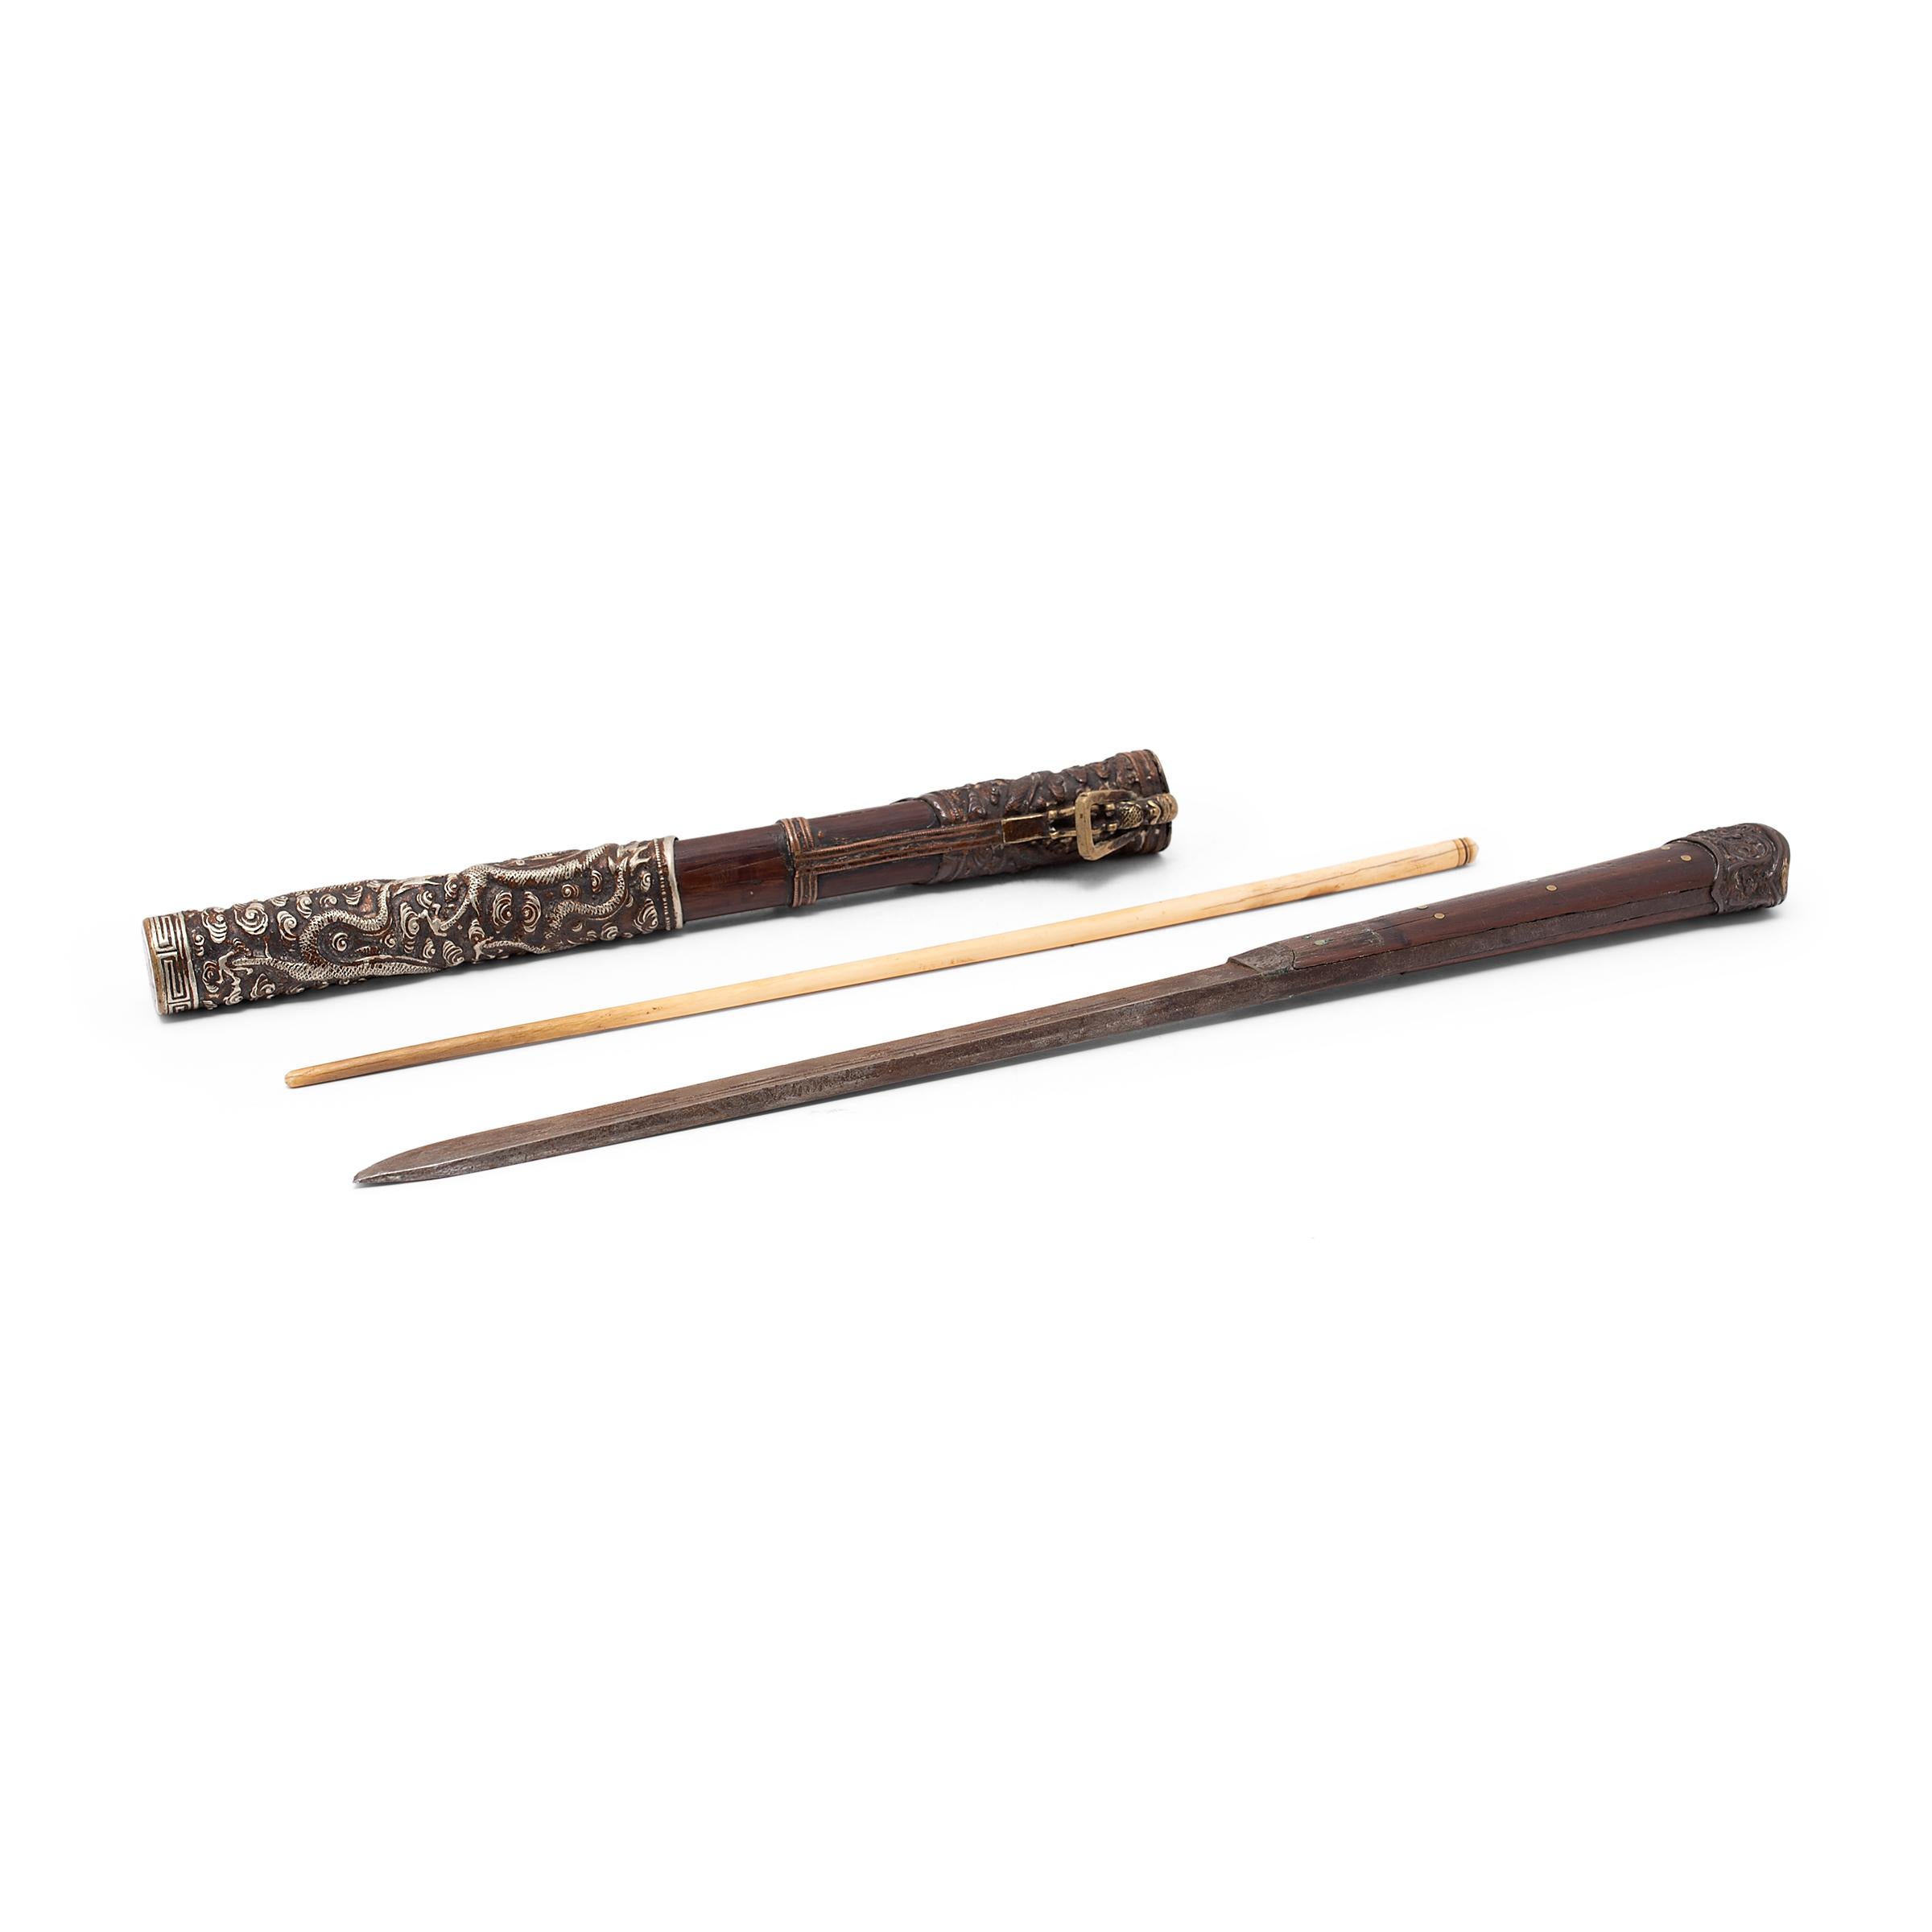 Qing Chinese Traveling Chopstick Set with Repoussé Fittings, c. 1850 For Sale